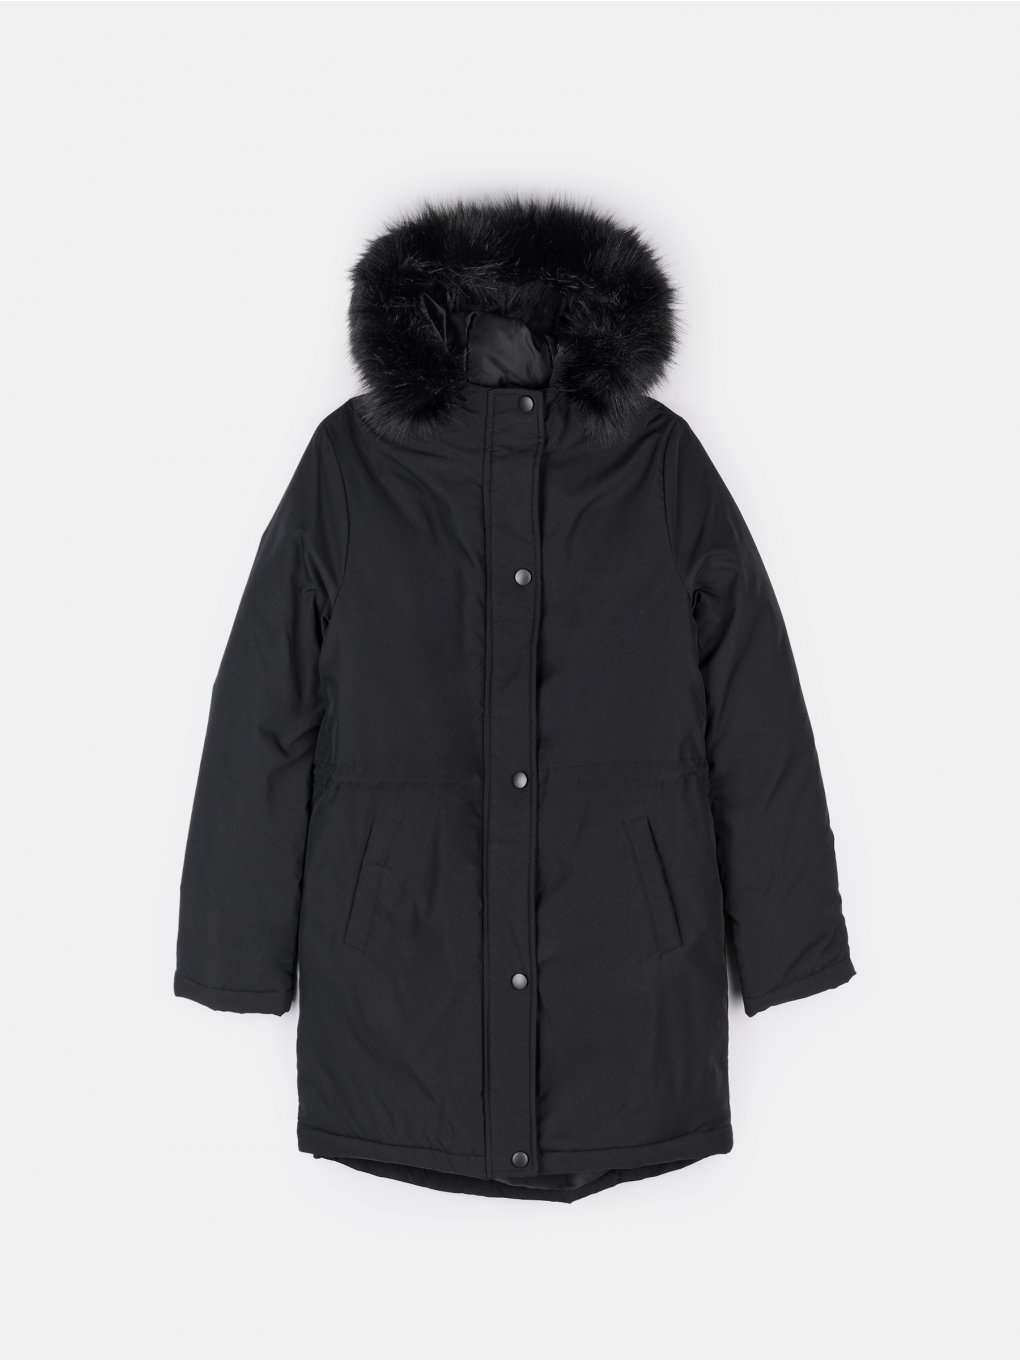 Parka with fur